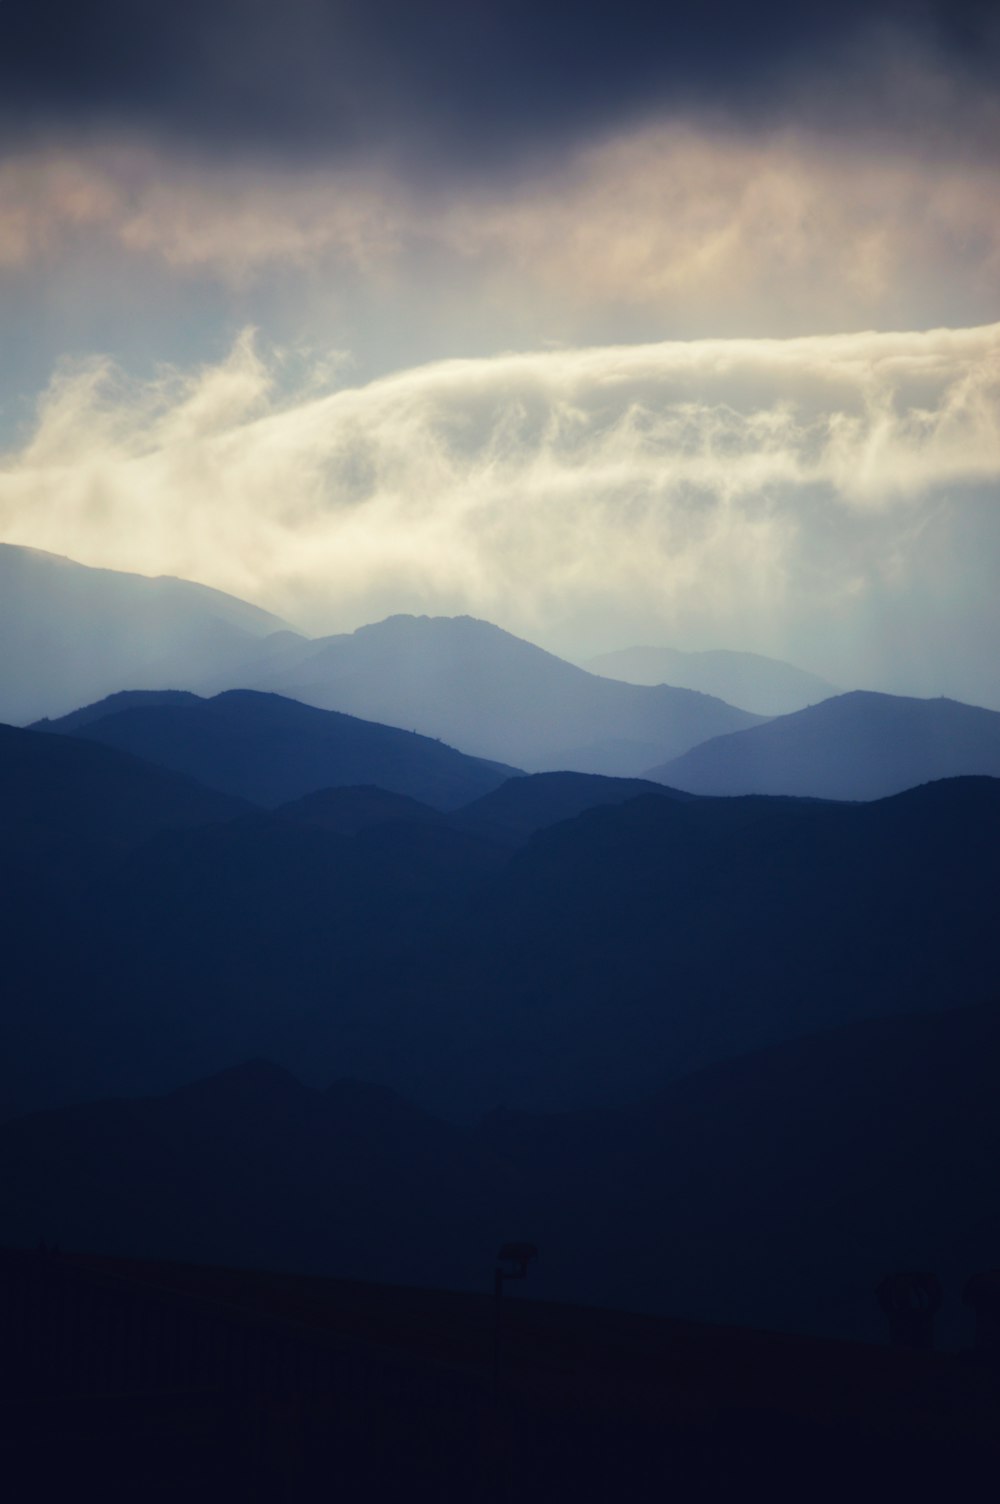 a view of a mountain range under a cloudy sky